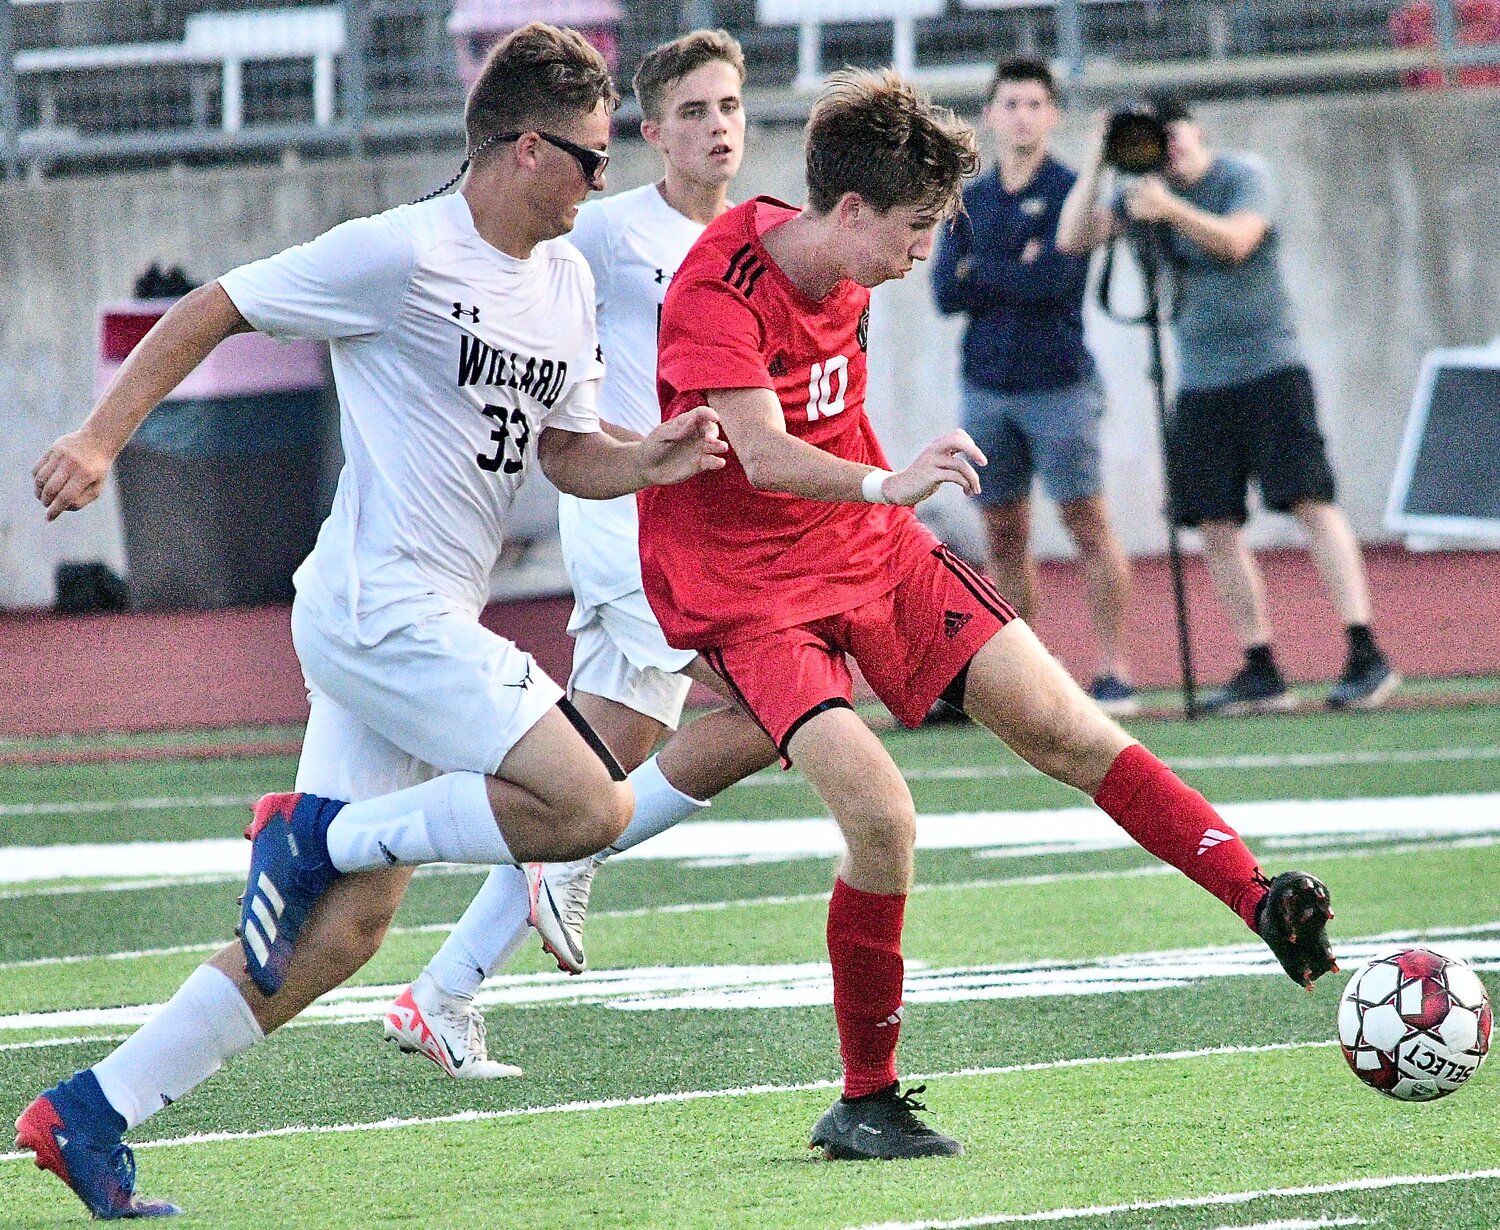 OZARK'S PHIN SCOTT connects for his second goal.